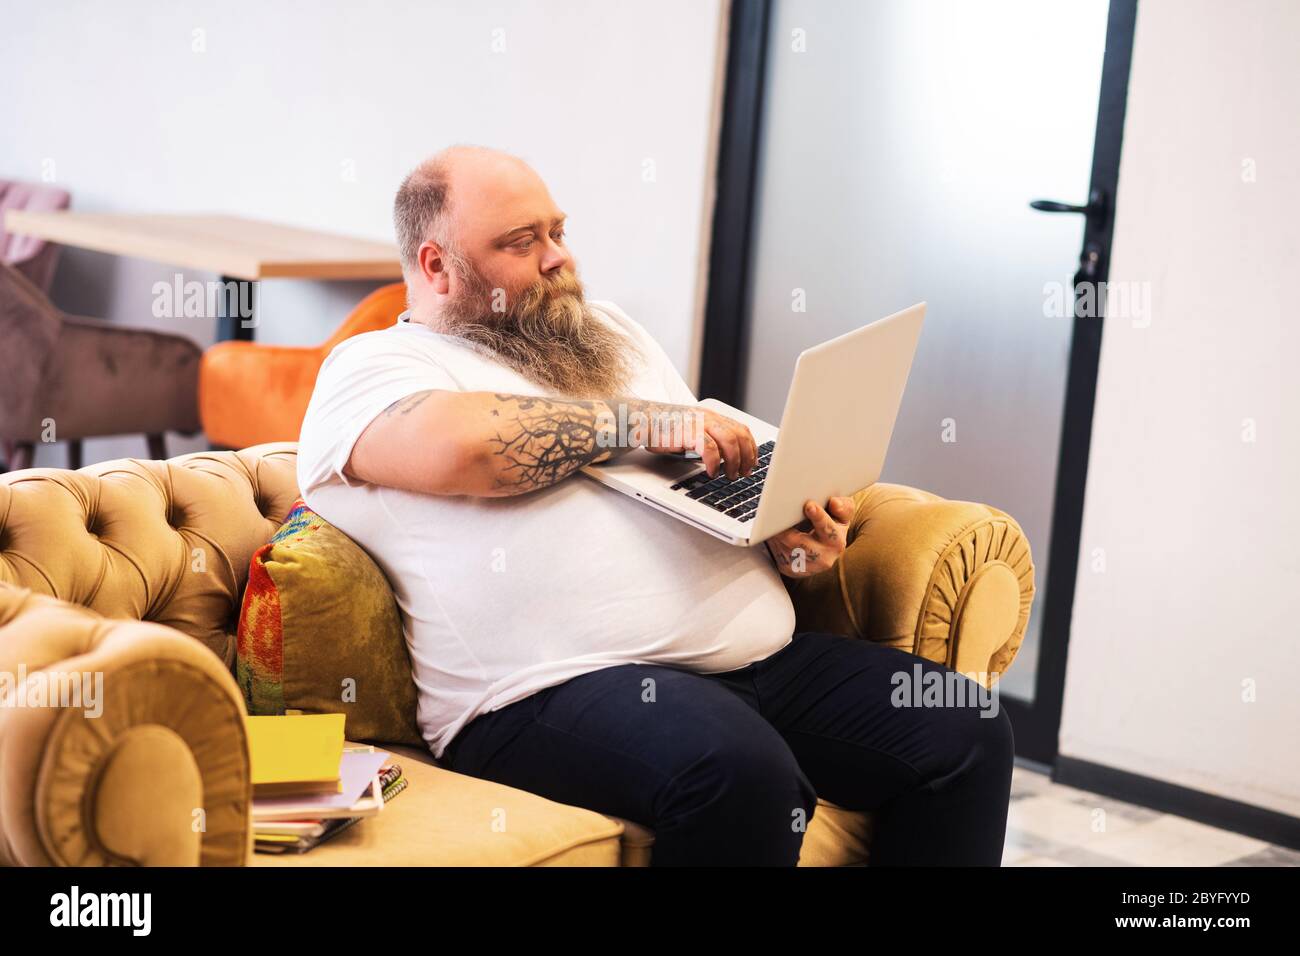 Bald bearded plump man sitting with a laptop in hands and working online Stock Photo